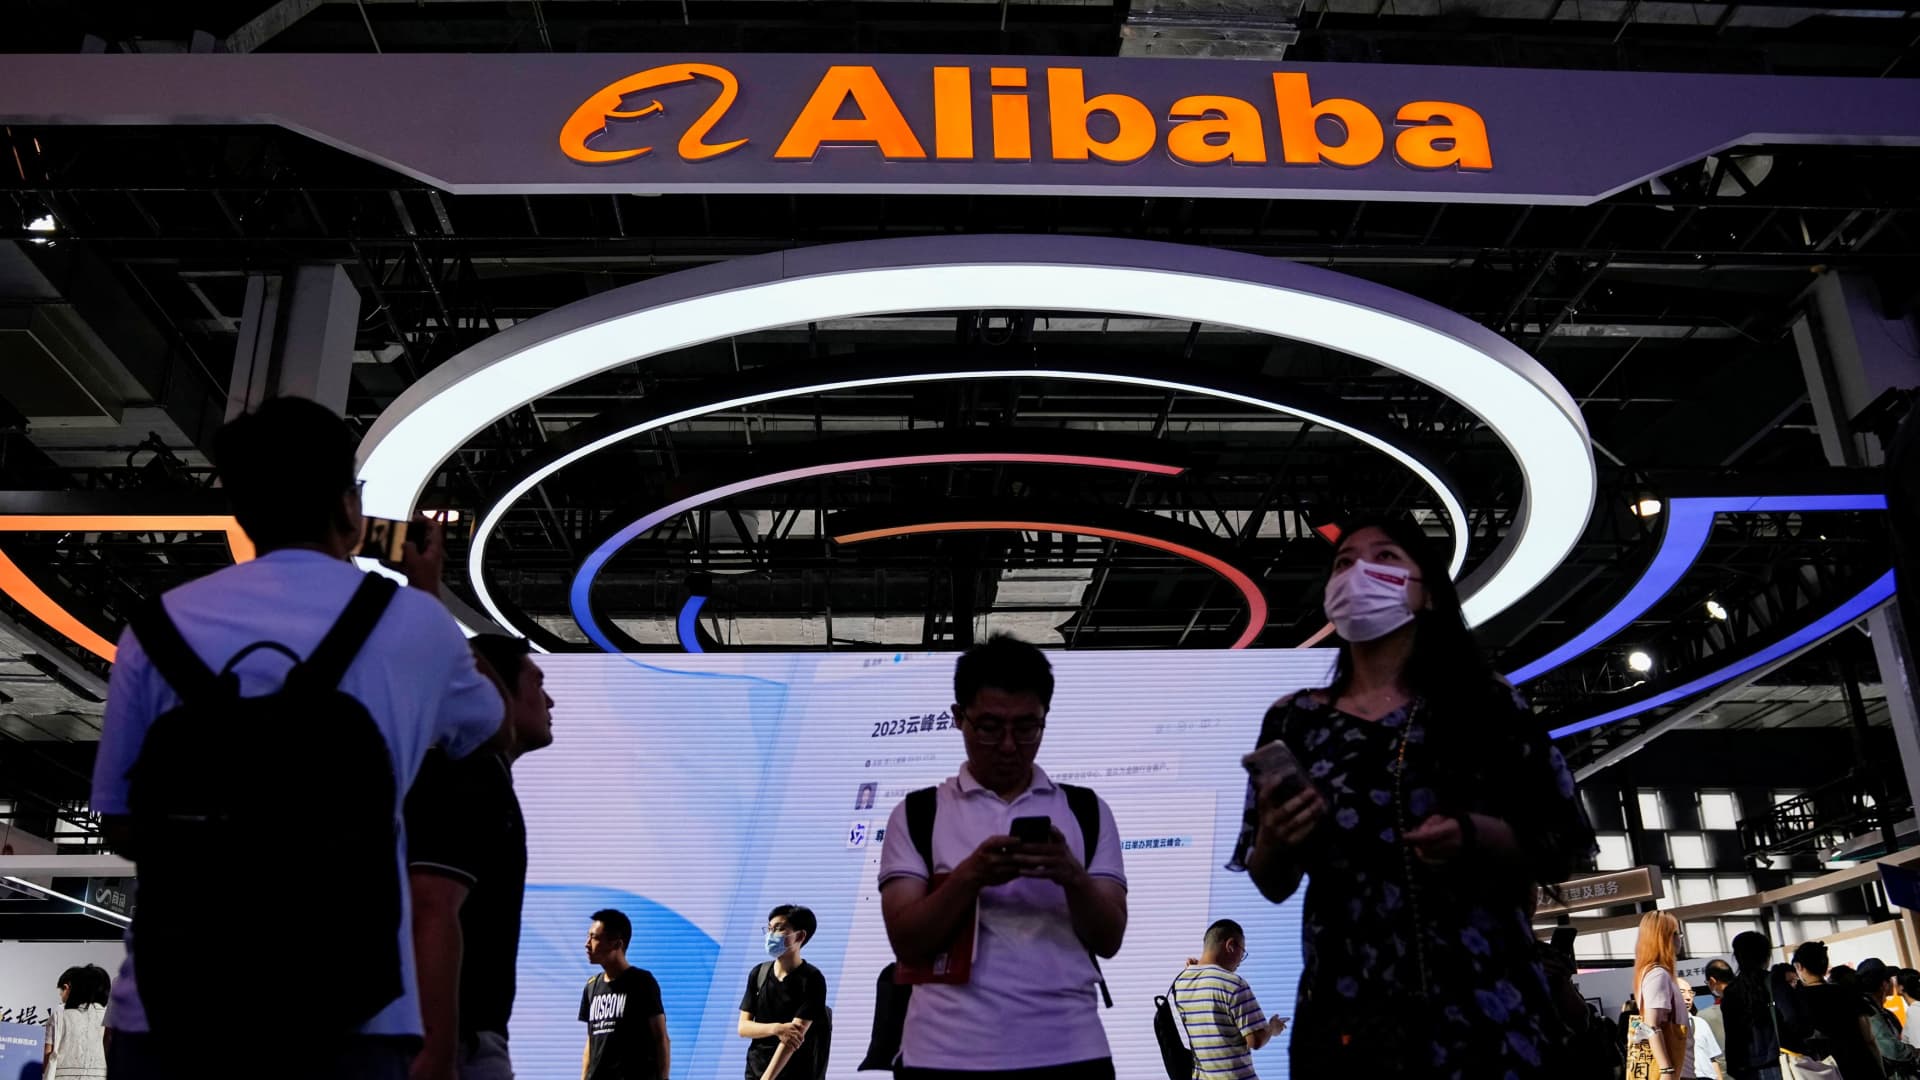 News Corp, Alibaba and more